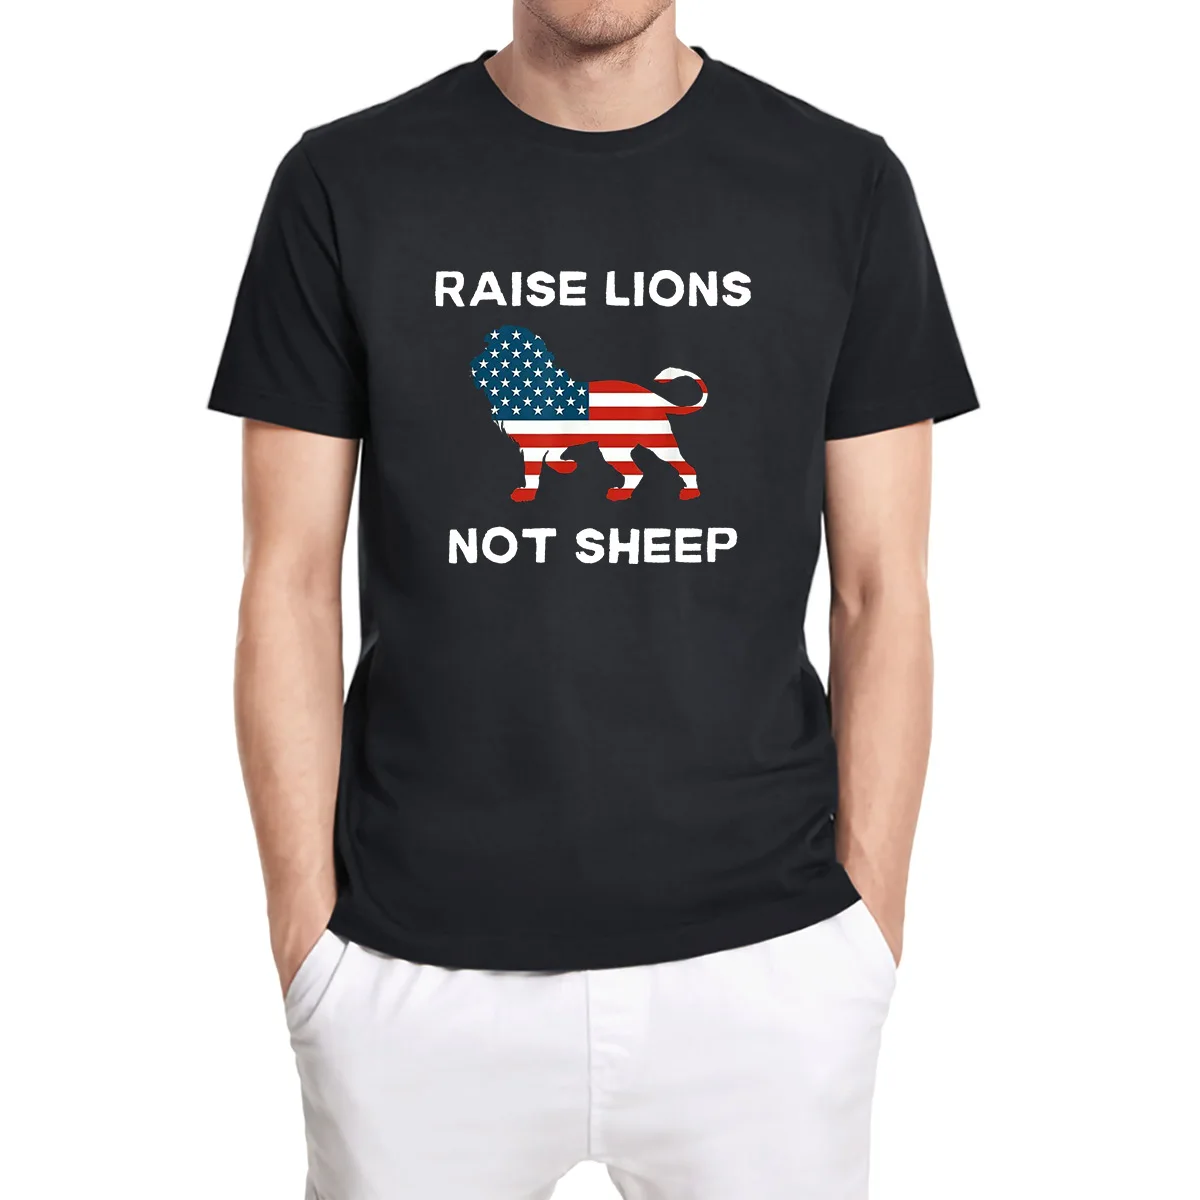 

Raise Lions Not Sheep American Patriot Patriotic Lion Funny Men's Short Sleeve Tops Funny Unisex T-Shirt High Quality Cotton Tee